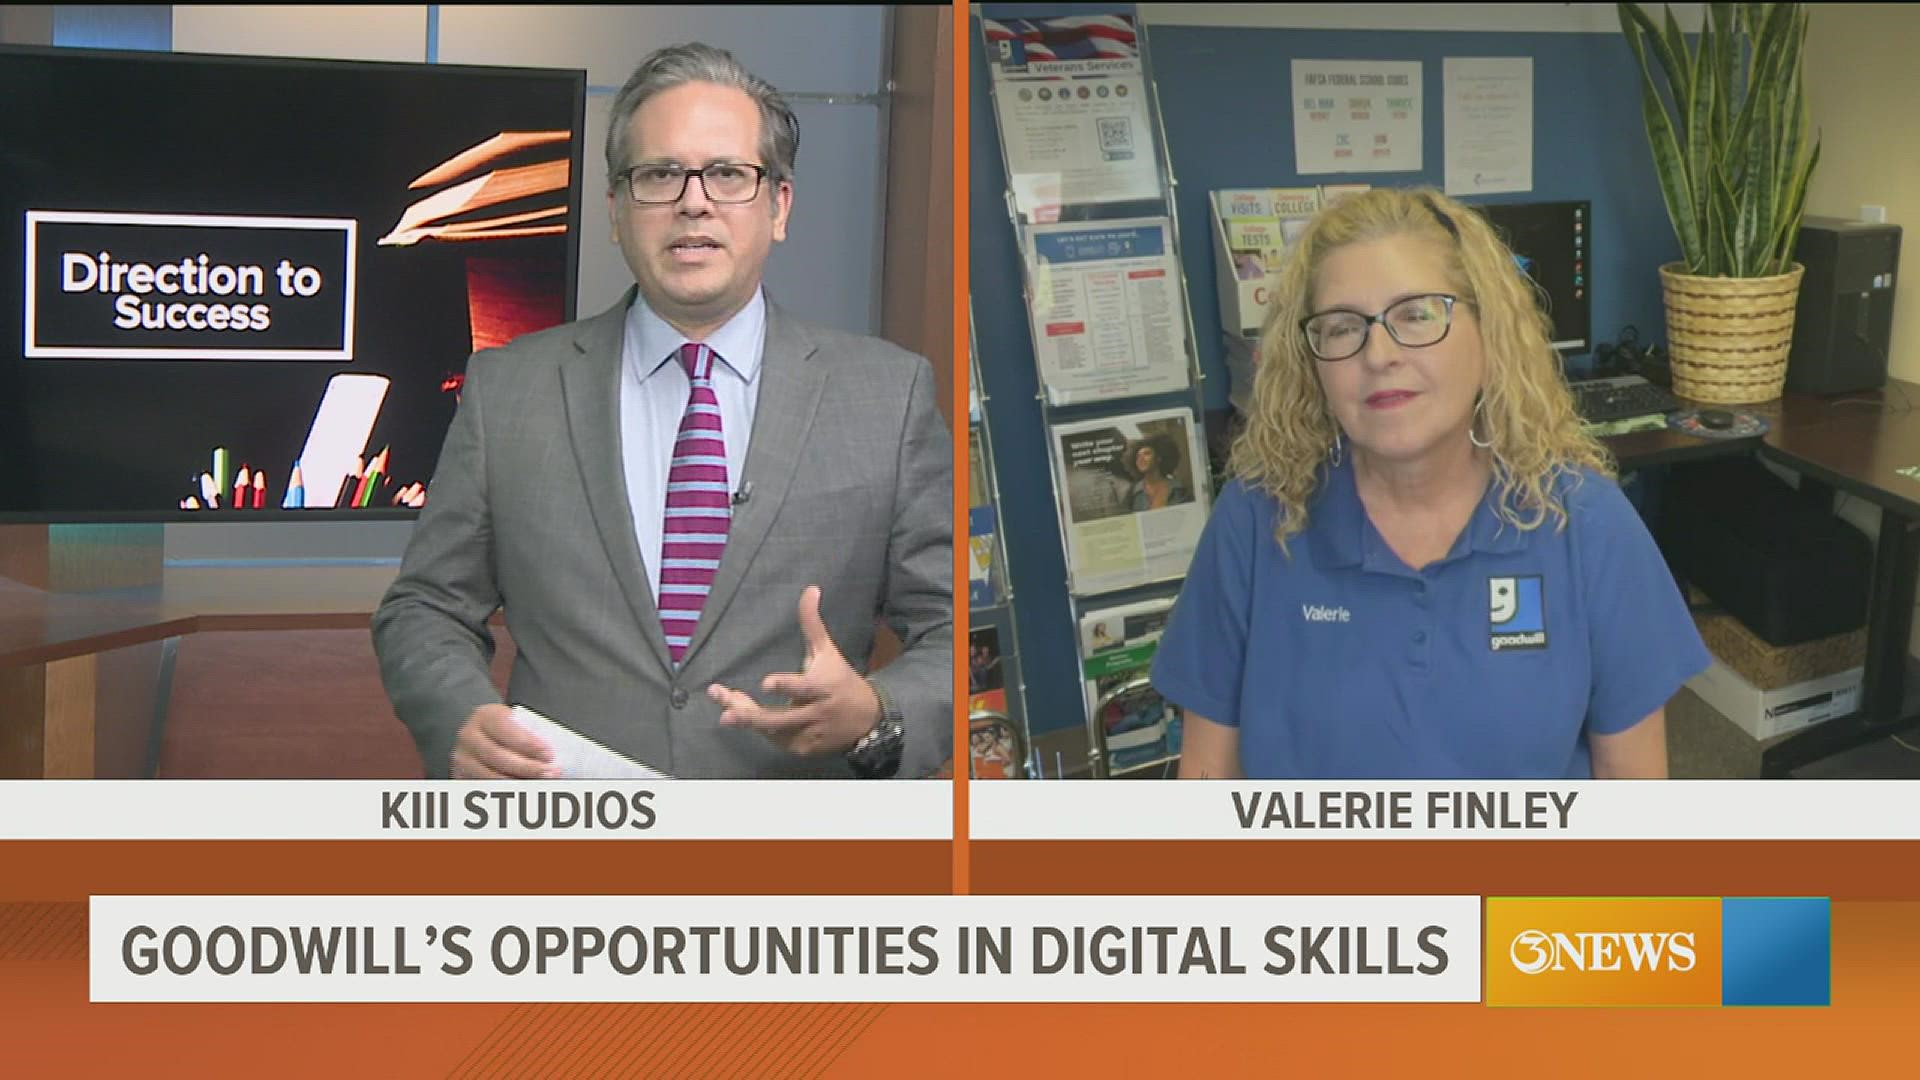 Goodwill Industries of South Texas is helping Texans get back to work by offering free online Digital Skills courses. Call 361-884-4068 to learn more.